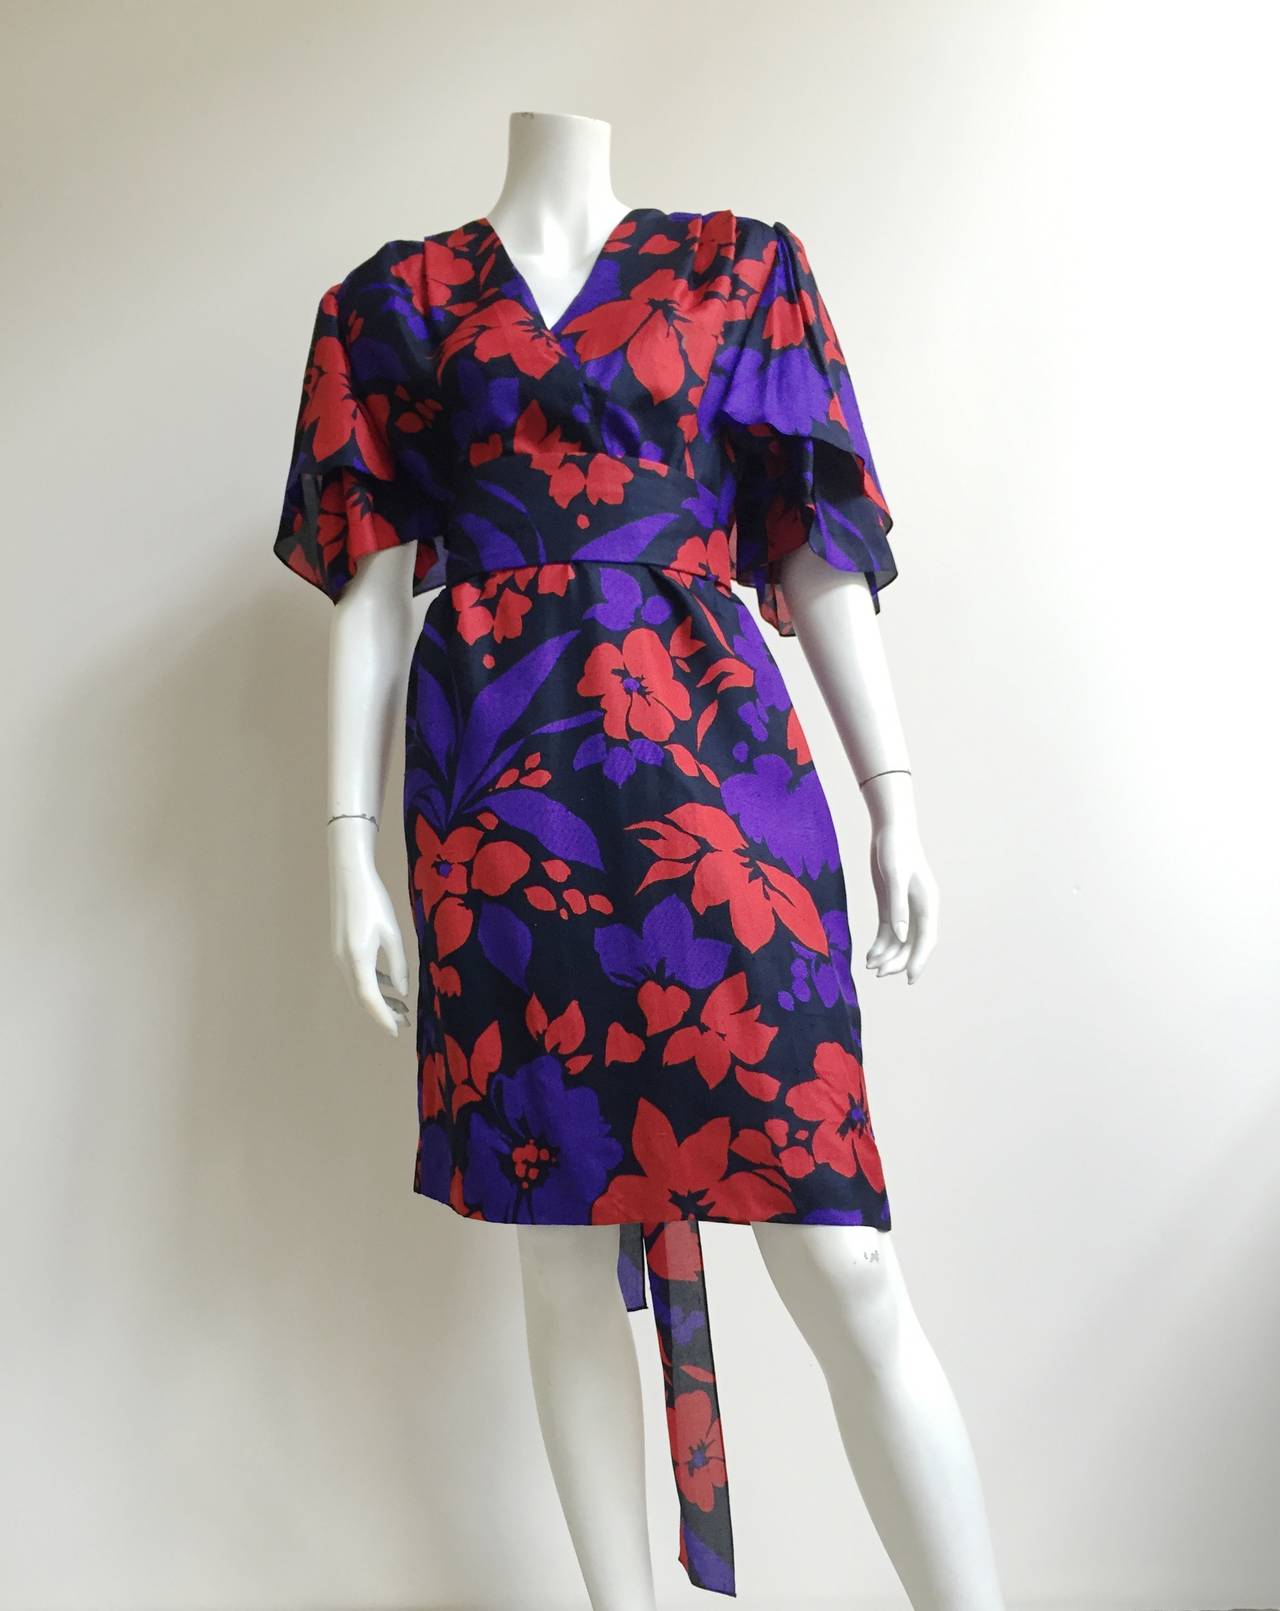 Givenchy 80s flower dress with sash belt size 12. 6